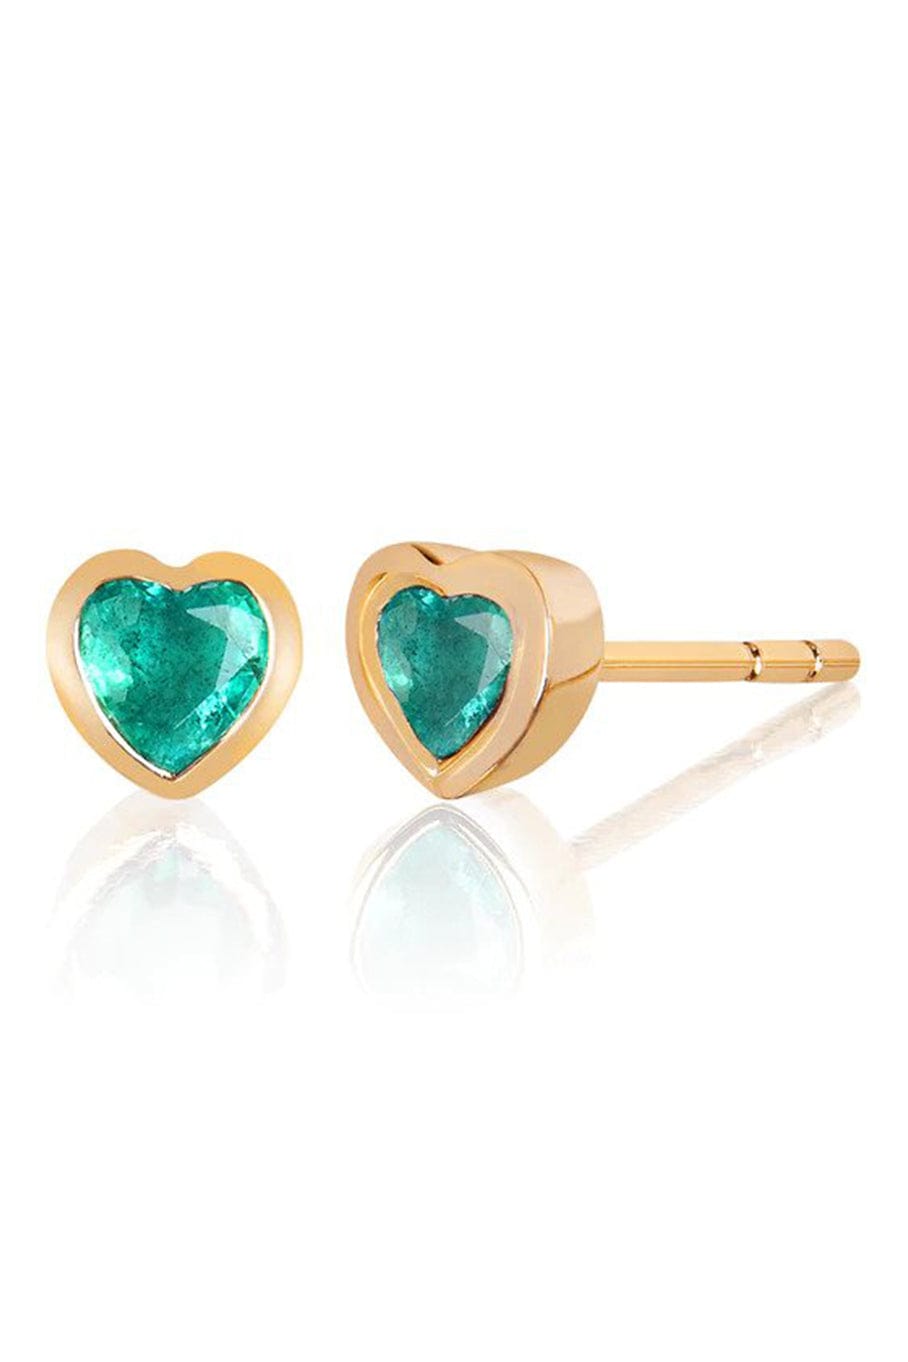 EF COLLECTION-Emerald Heart Studs-YELLOW GOLD